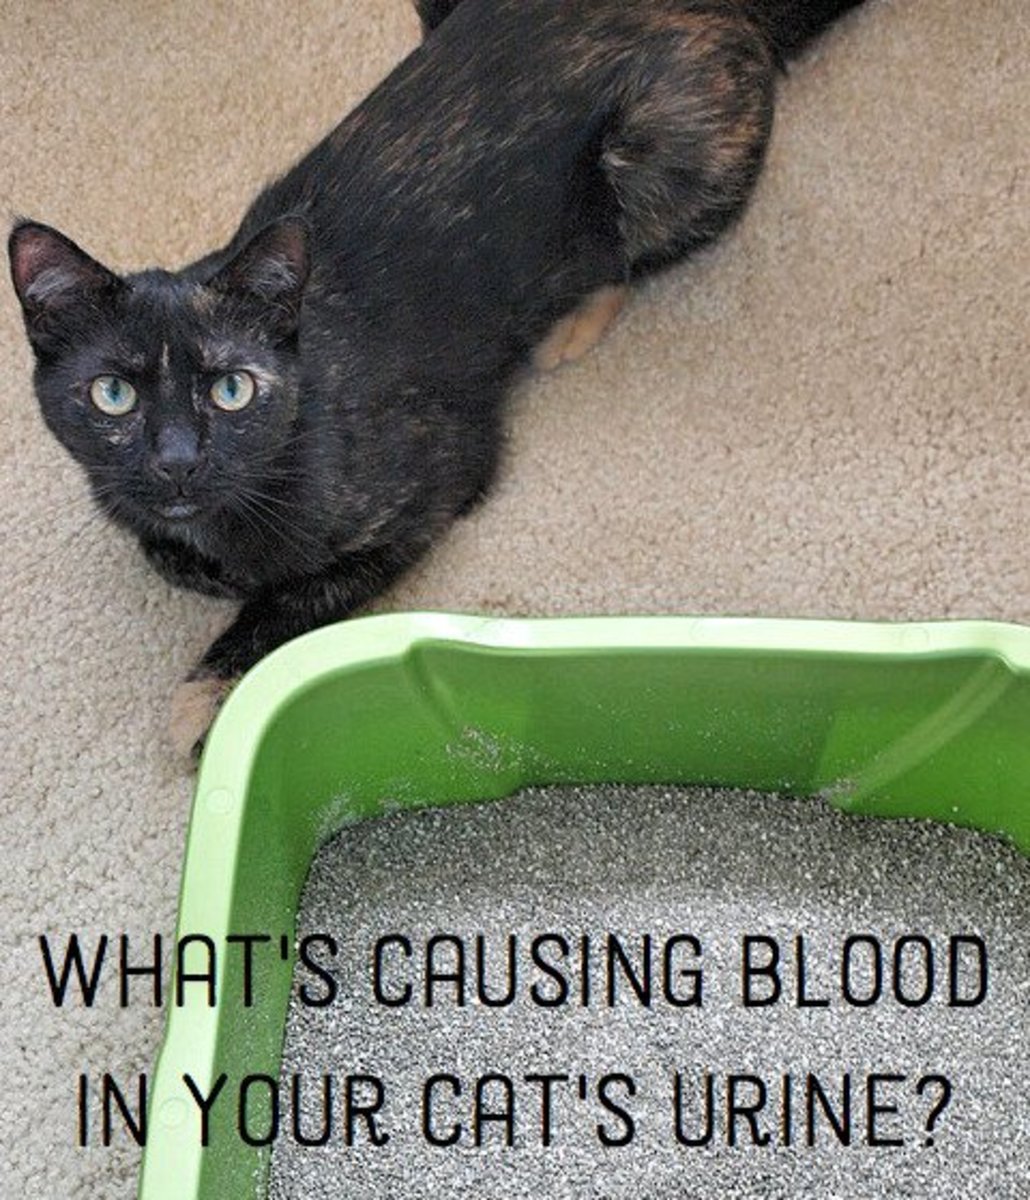 Is there blood in your cat's urine? This article will tell you why, and what you can do about it.